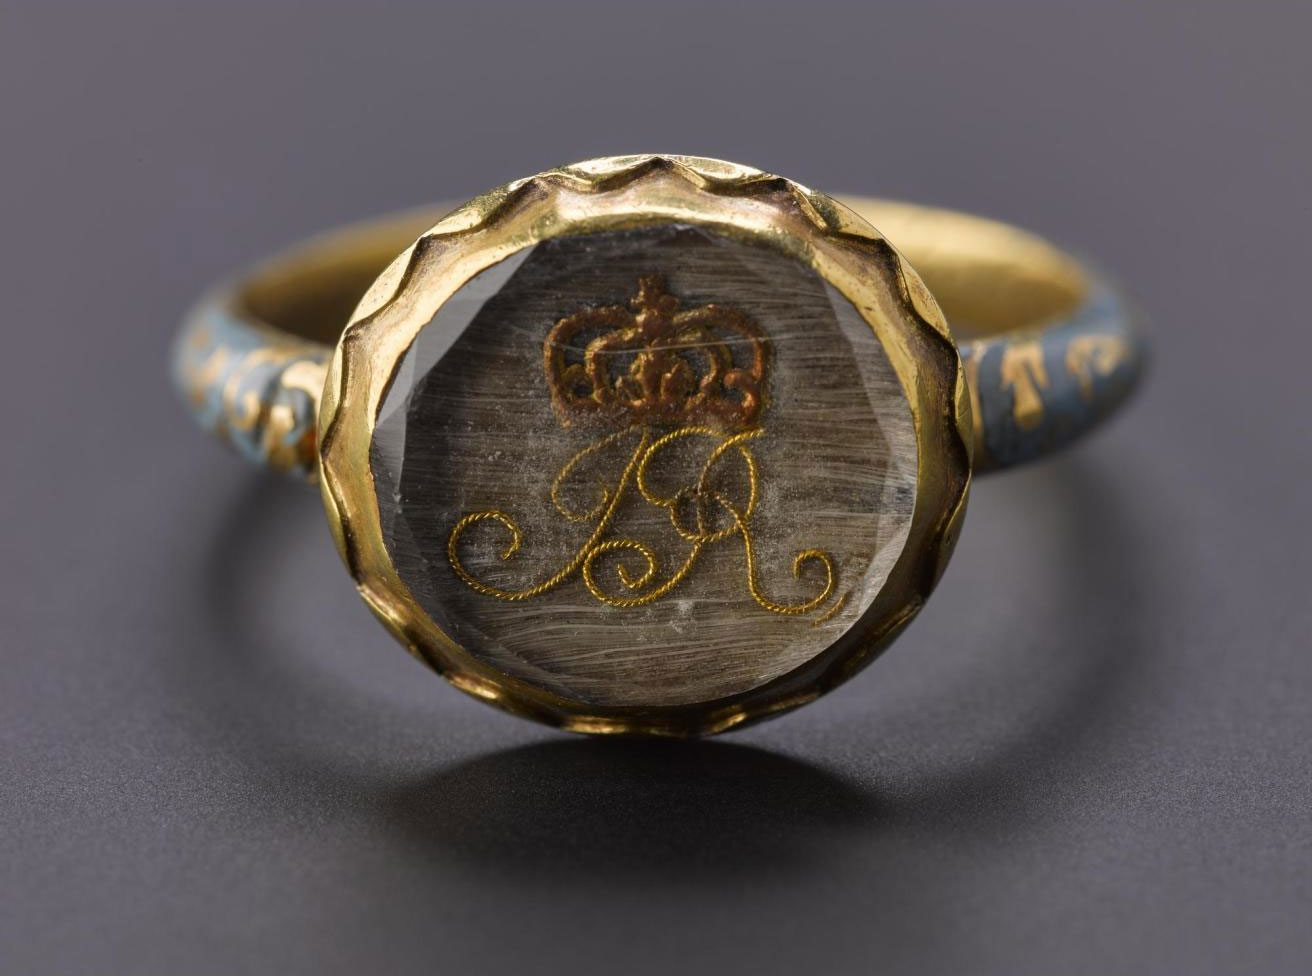 King in exile: Ring belonging to James VII and II